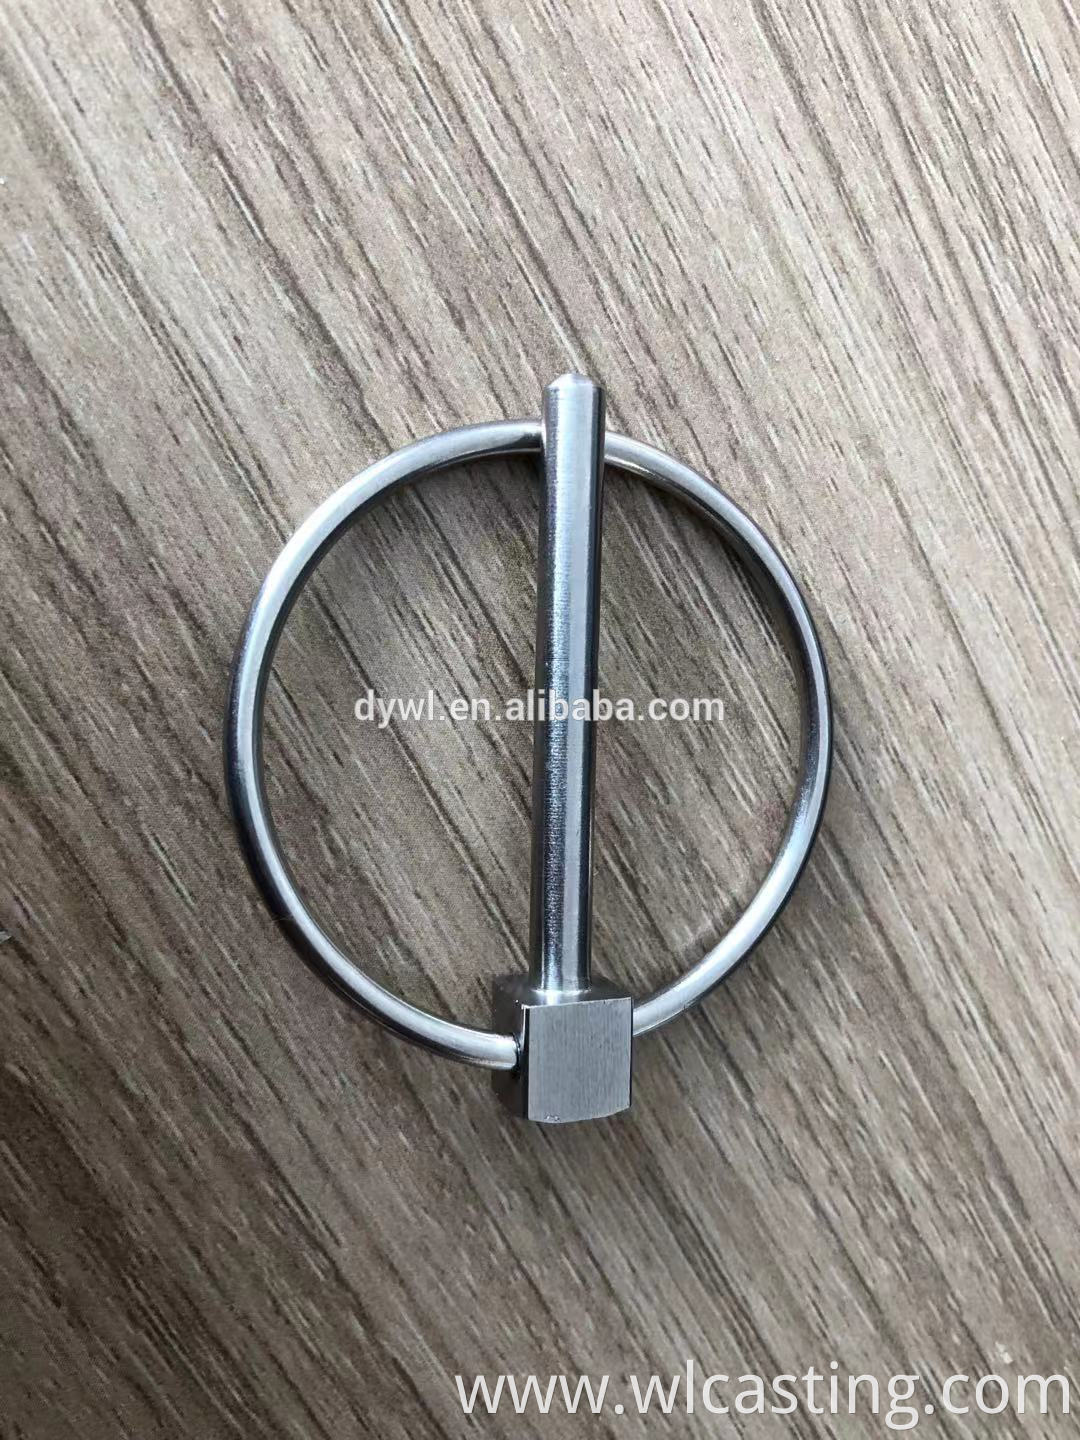 locking pin stainless steel clip ring casting and machine